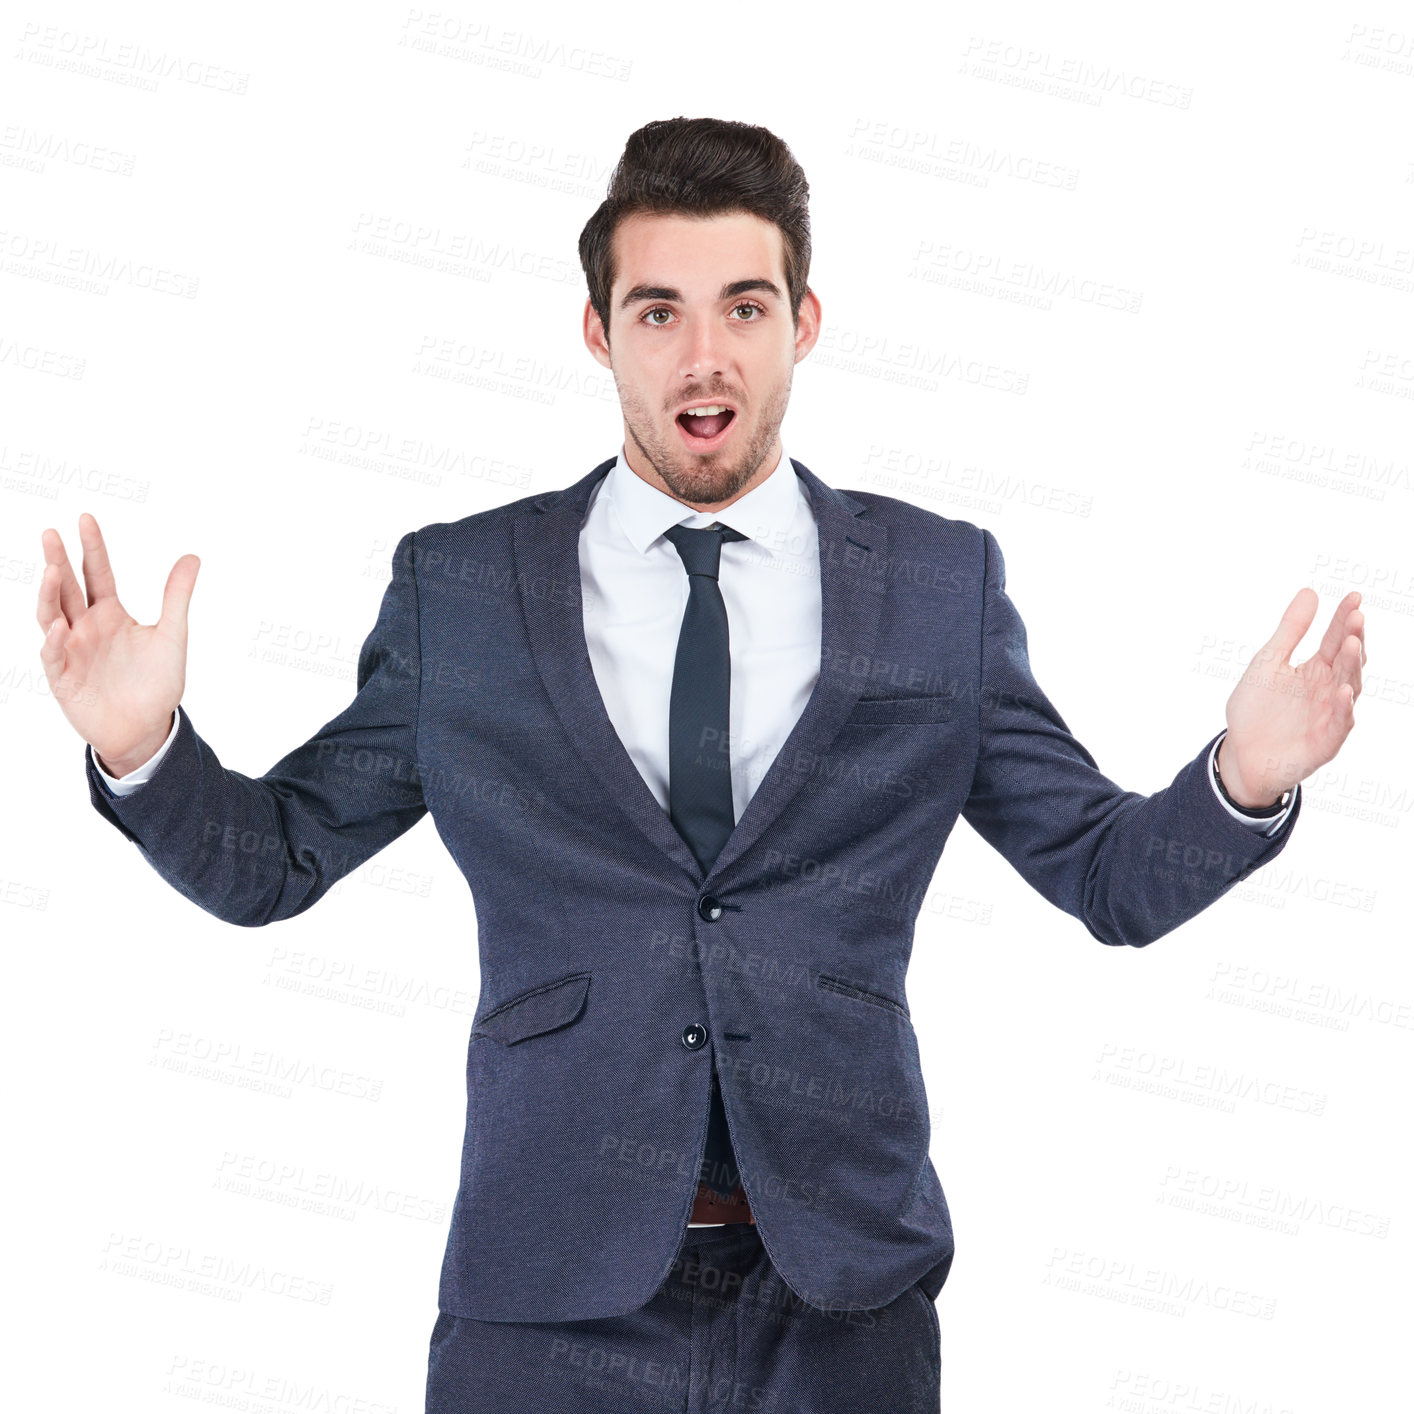 Buy stock photo Studio shot of a young businessman looking surprised against a white background